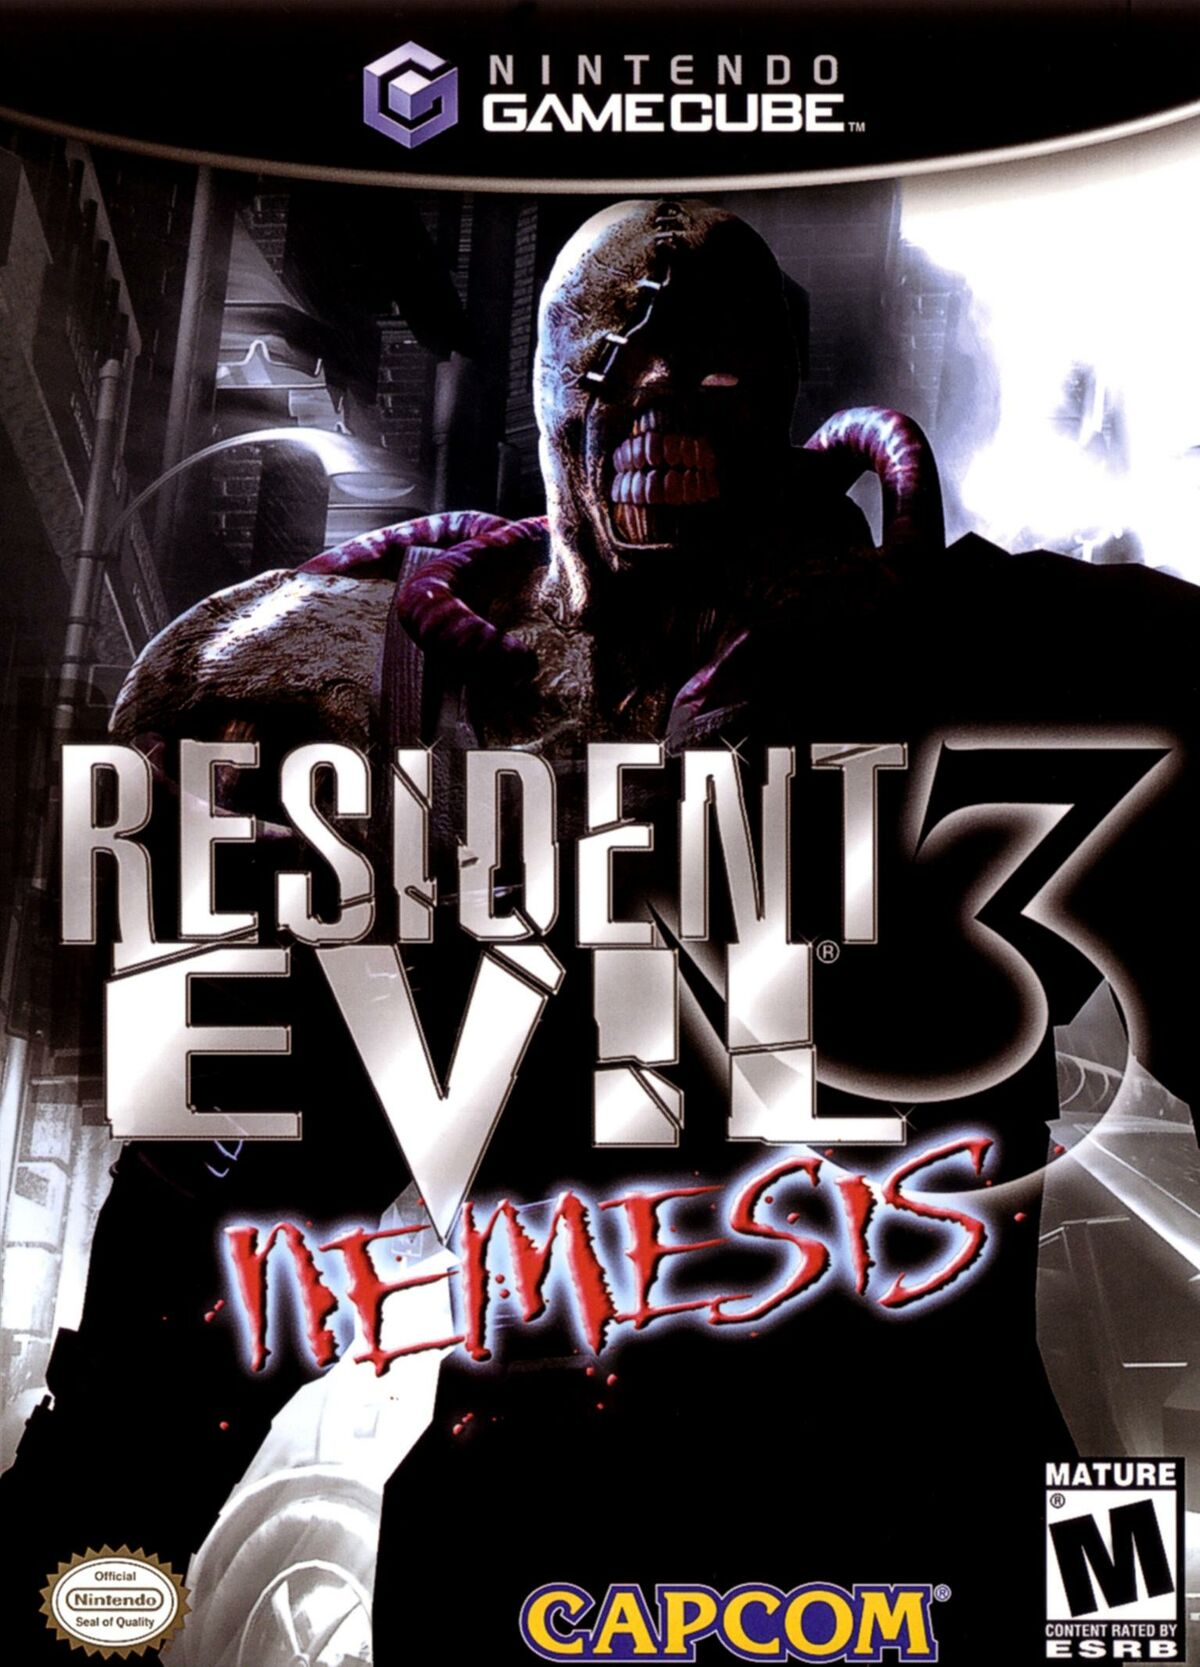 Download Resident Evil 5 for SHIELD TV 26 APK For Android